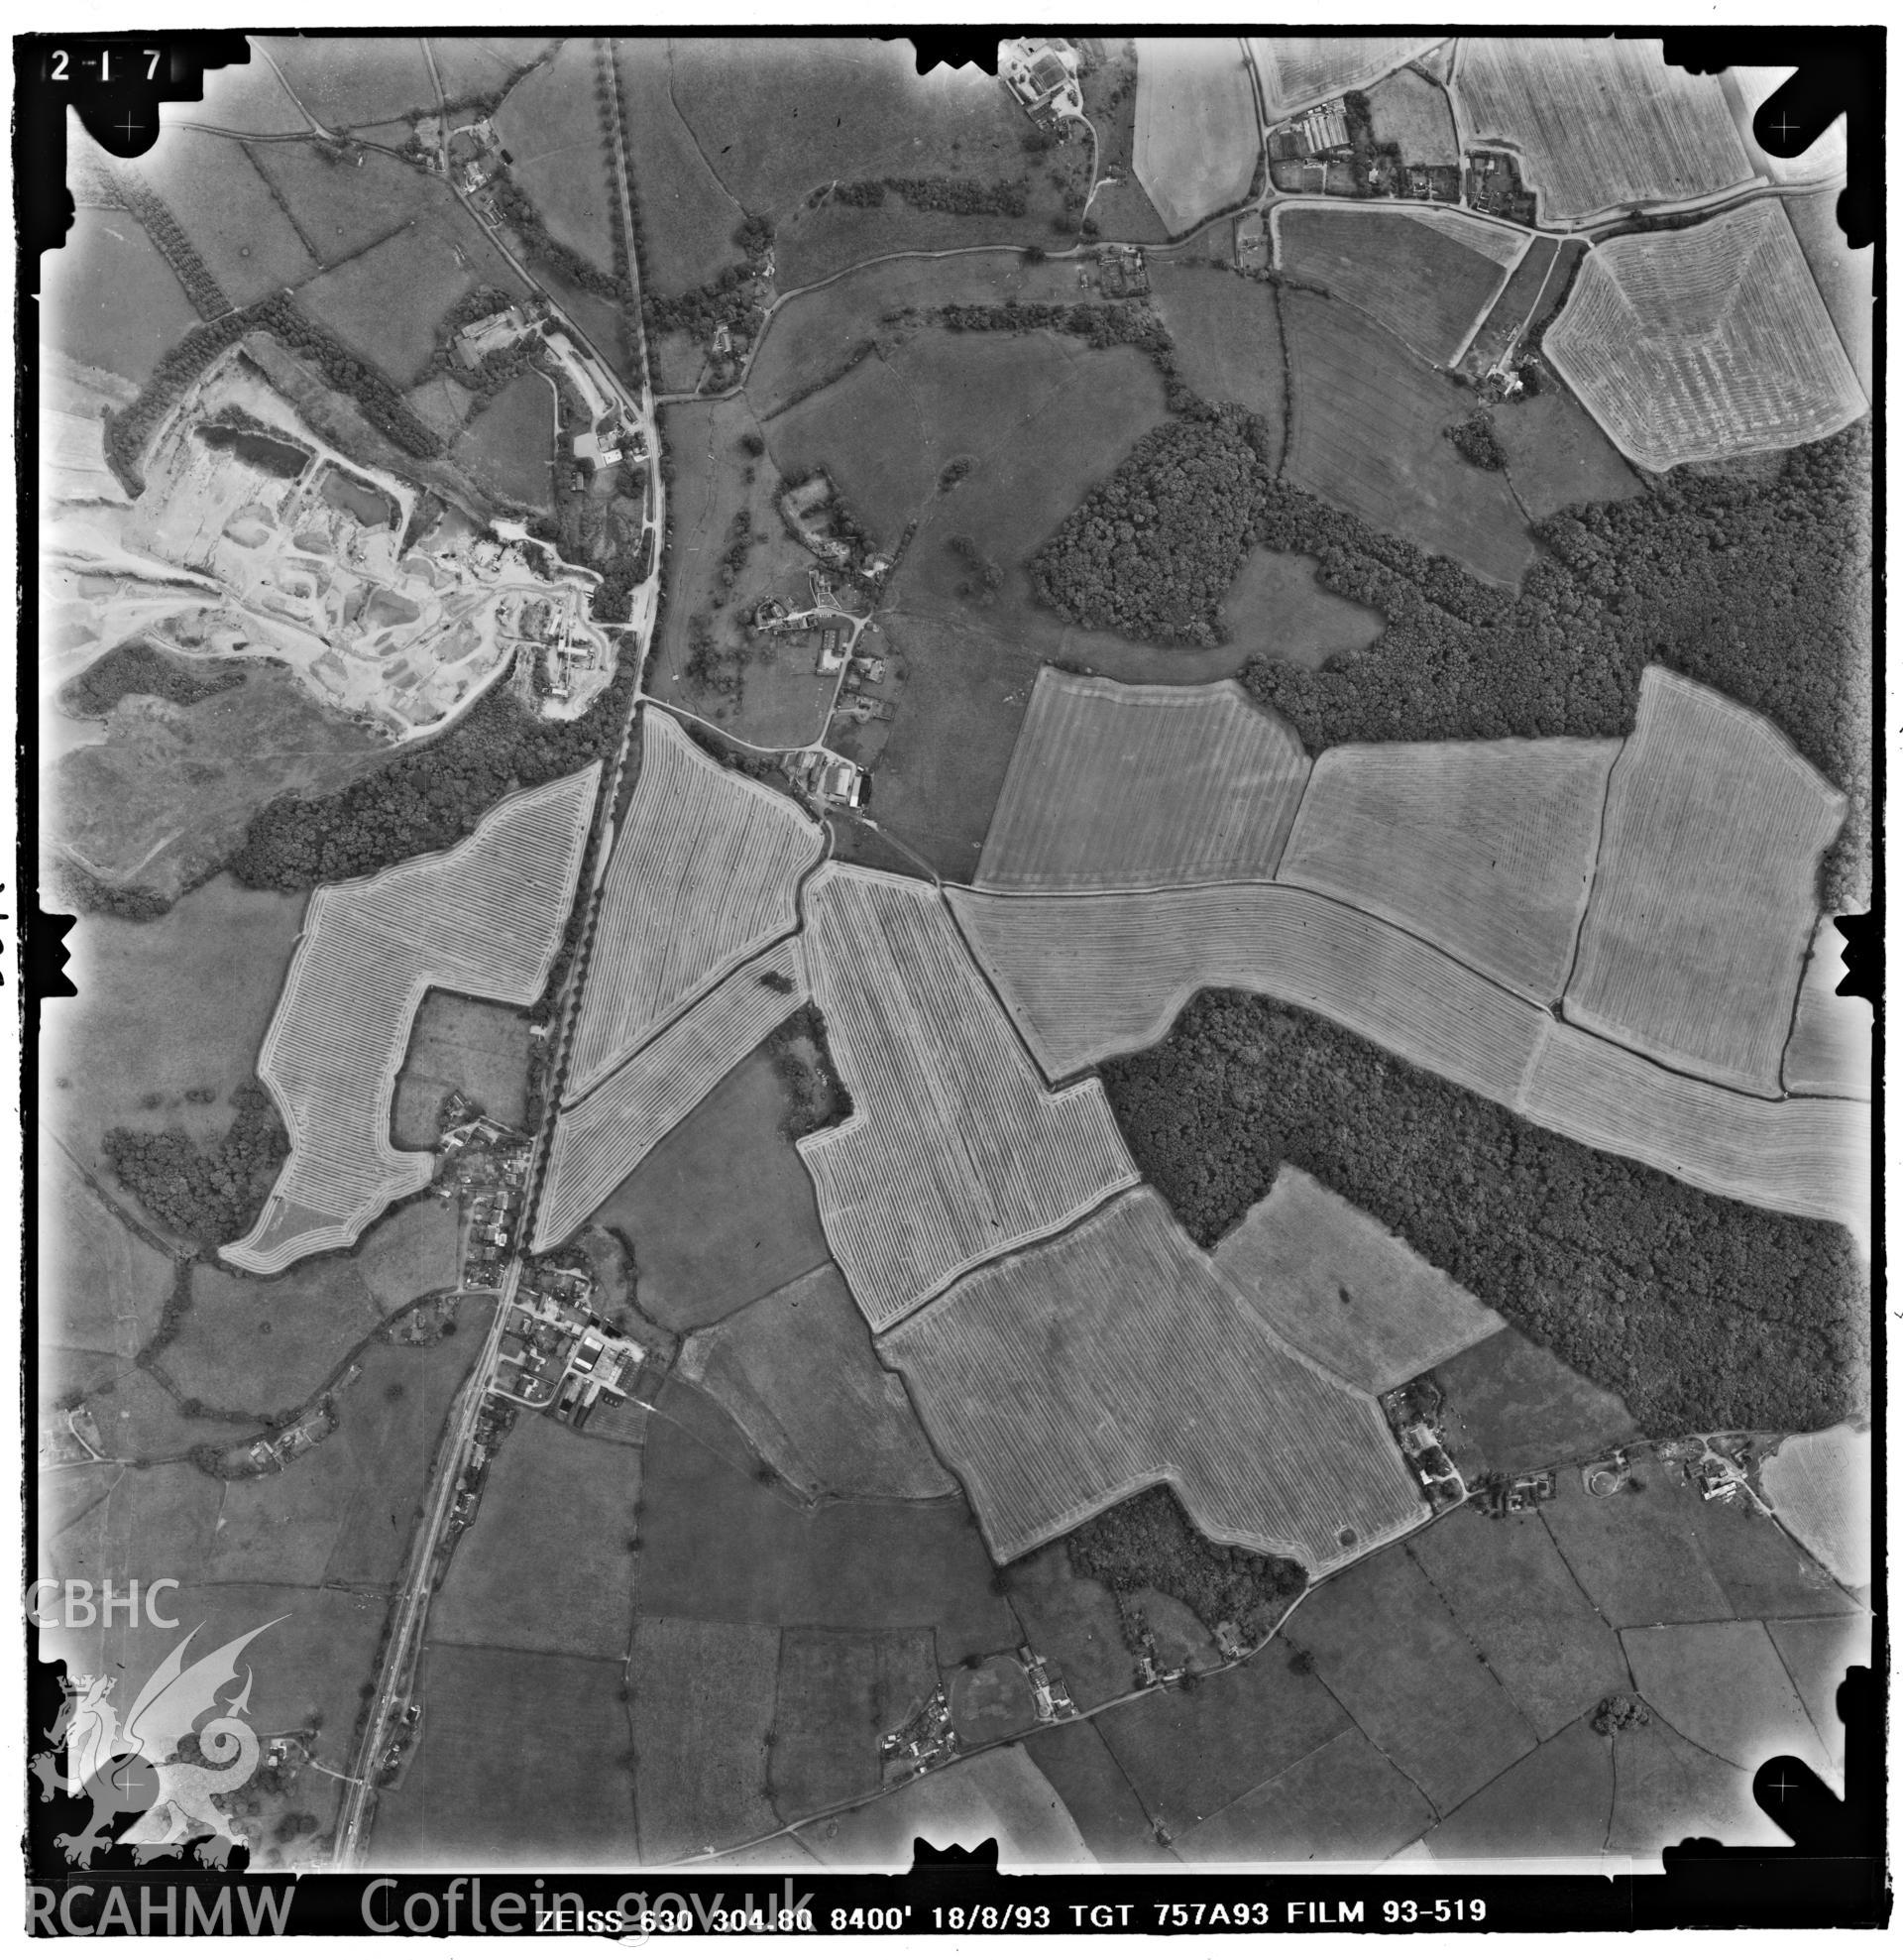 Digitized copy of an aerial photograph showing the Penhow area, taken by Ordnance Survey, 1993.